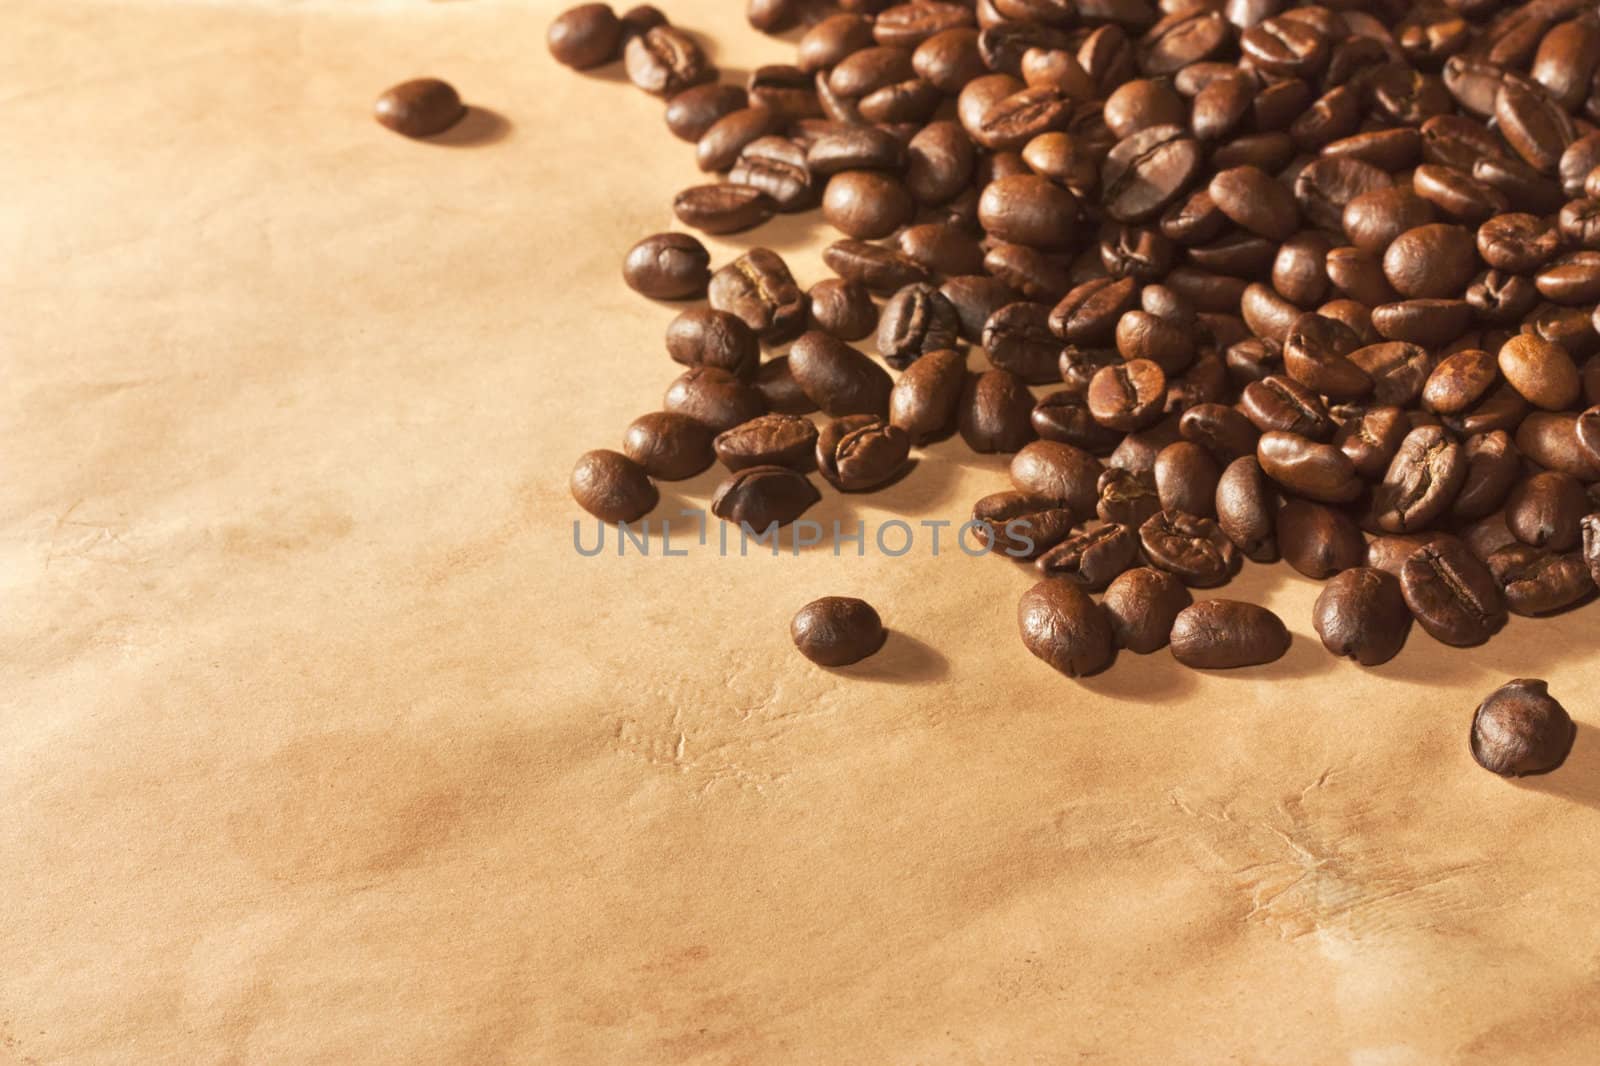 Pile of coffee beans on paper by alexvav